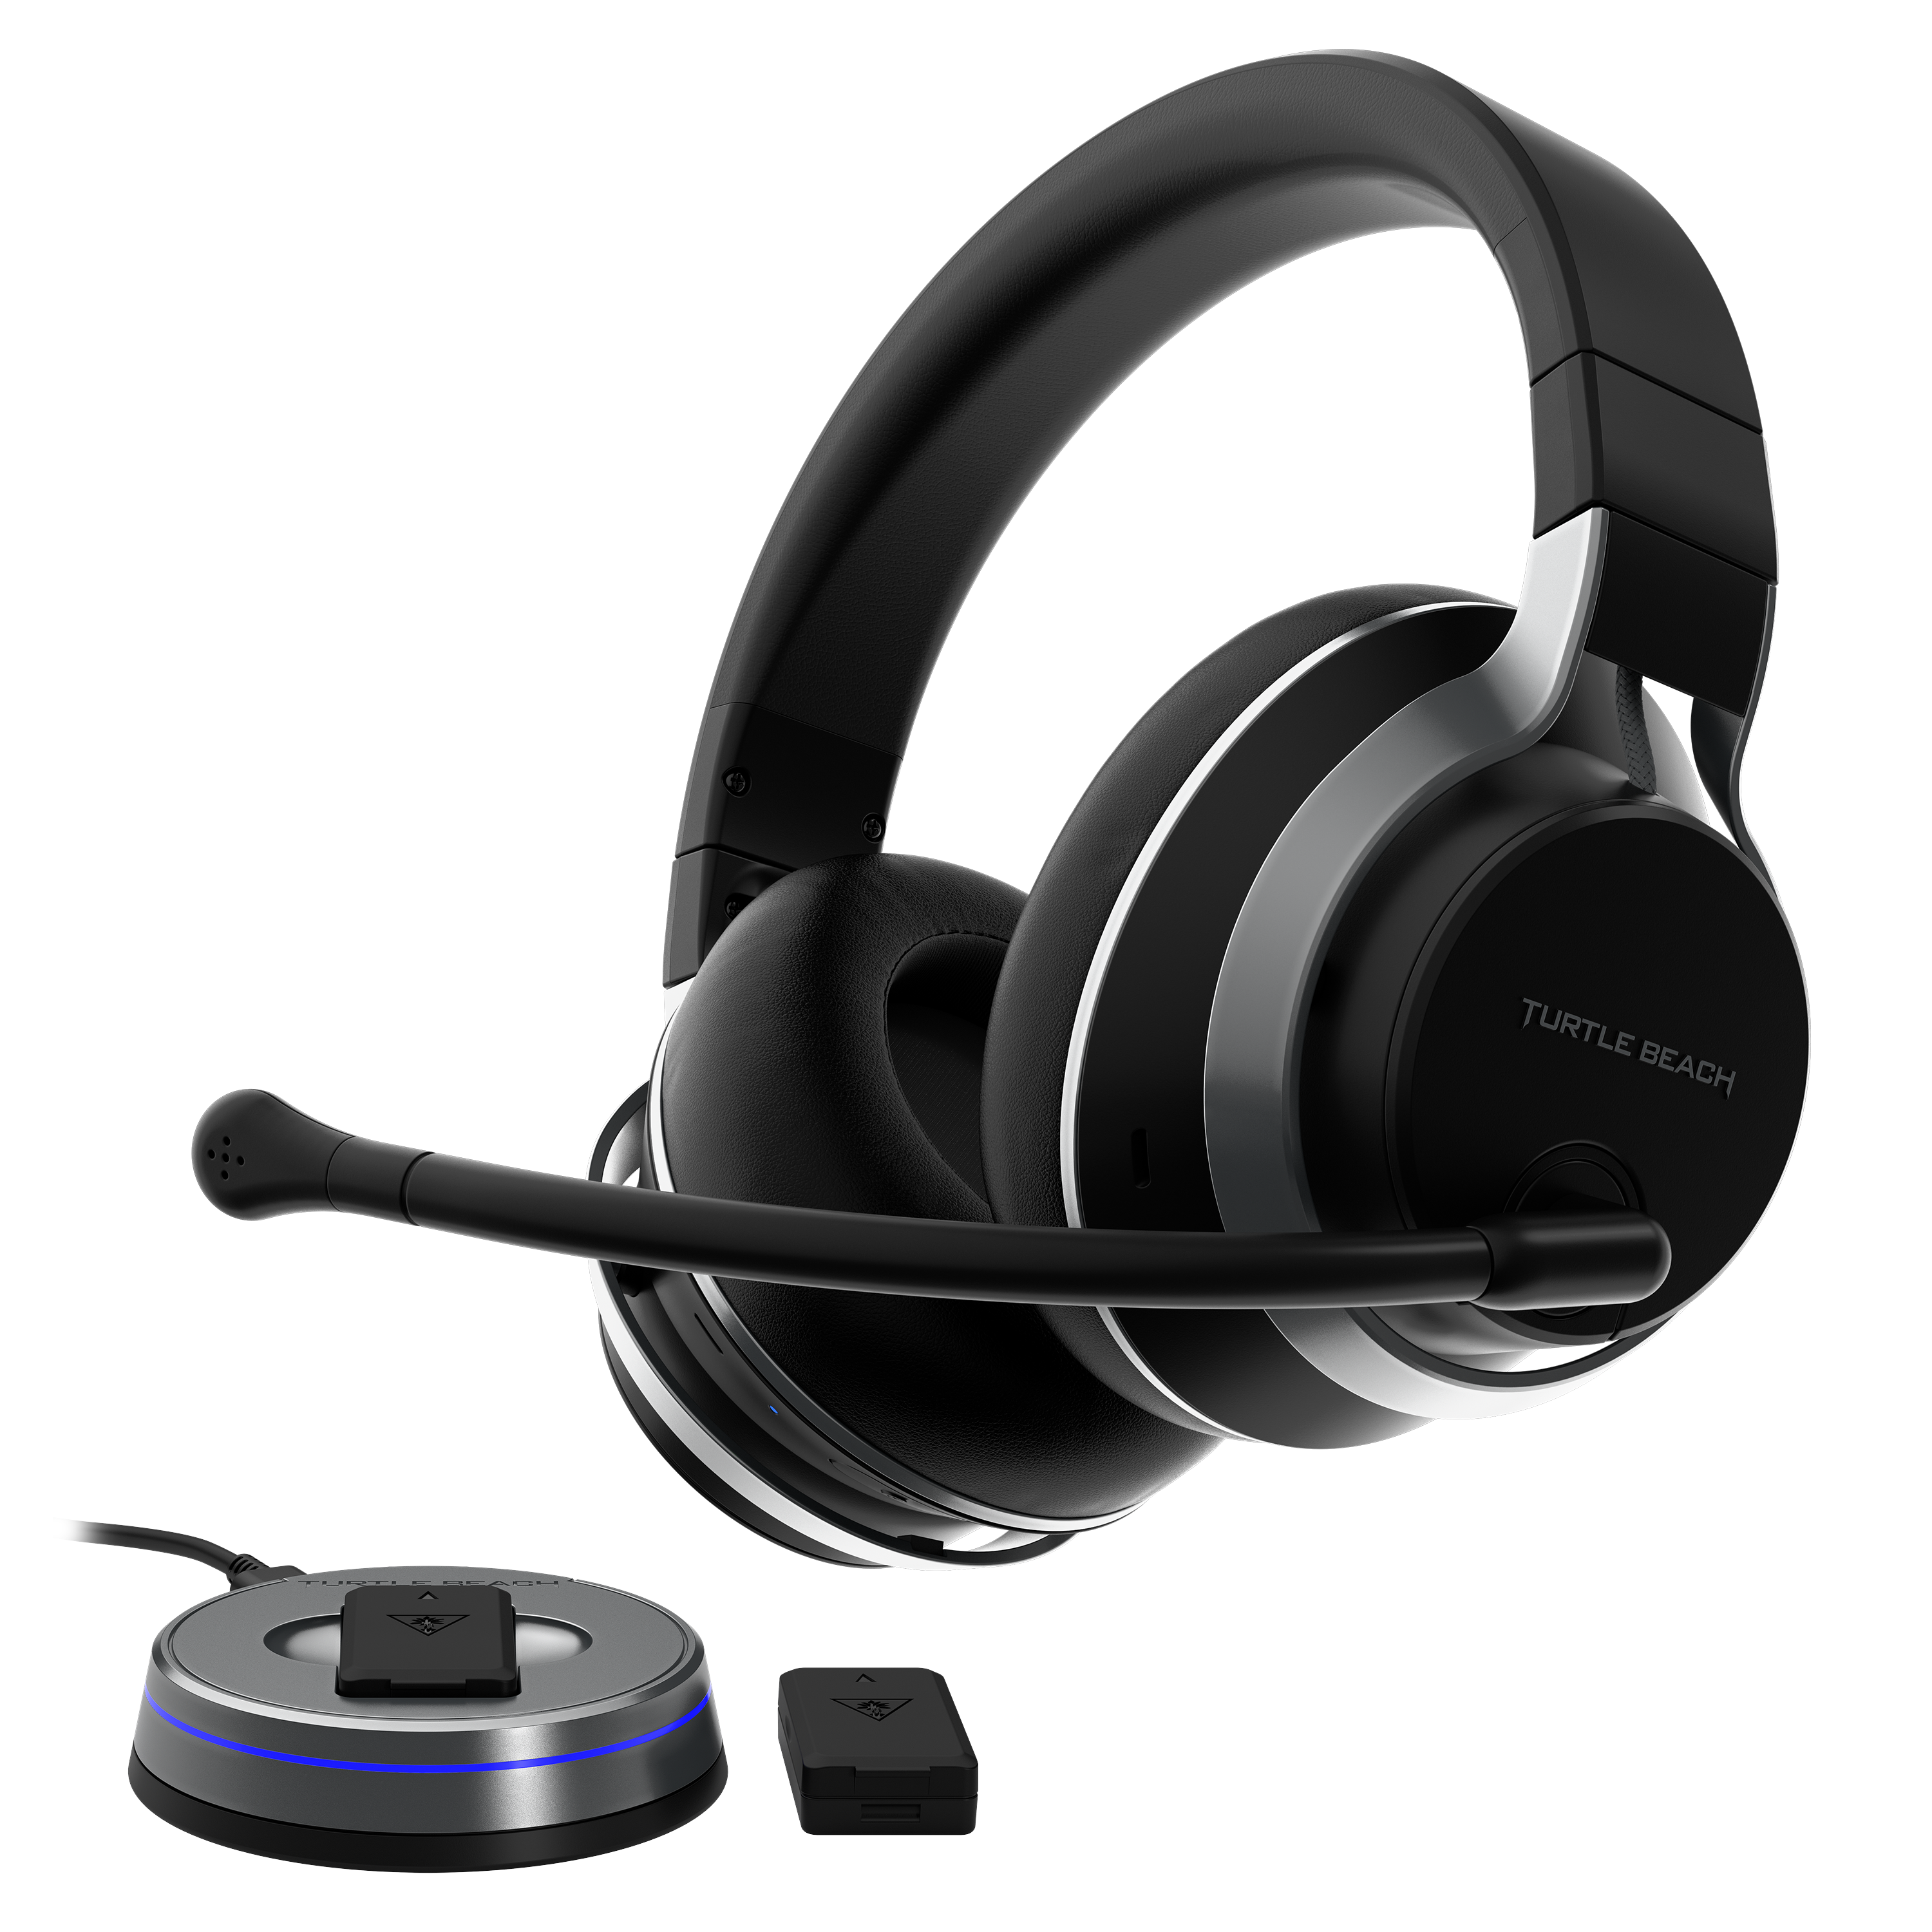 Turtle Beach Stealth Pro headset review